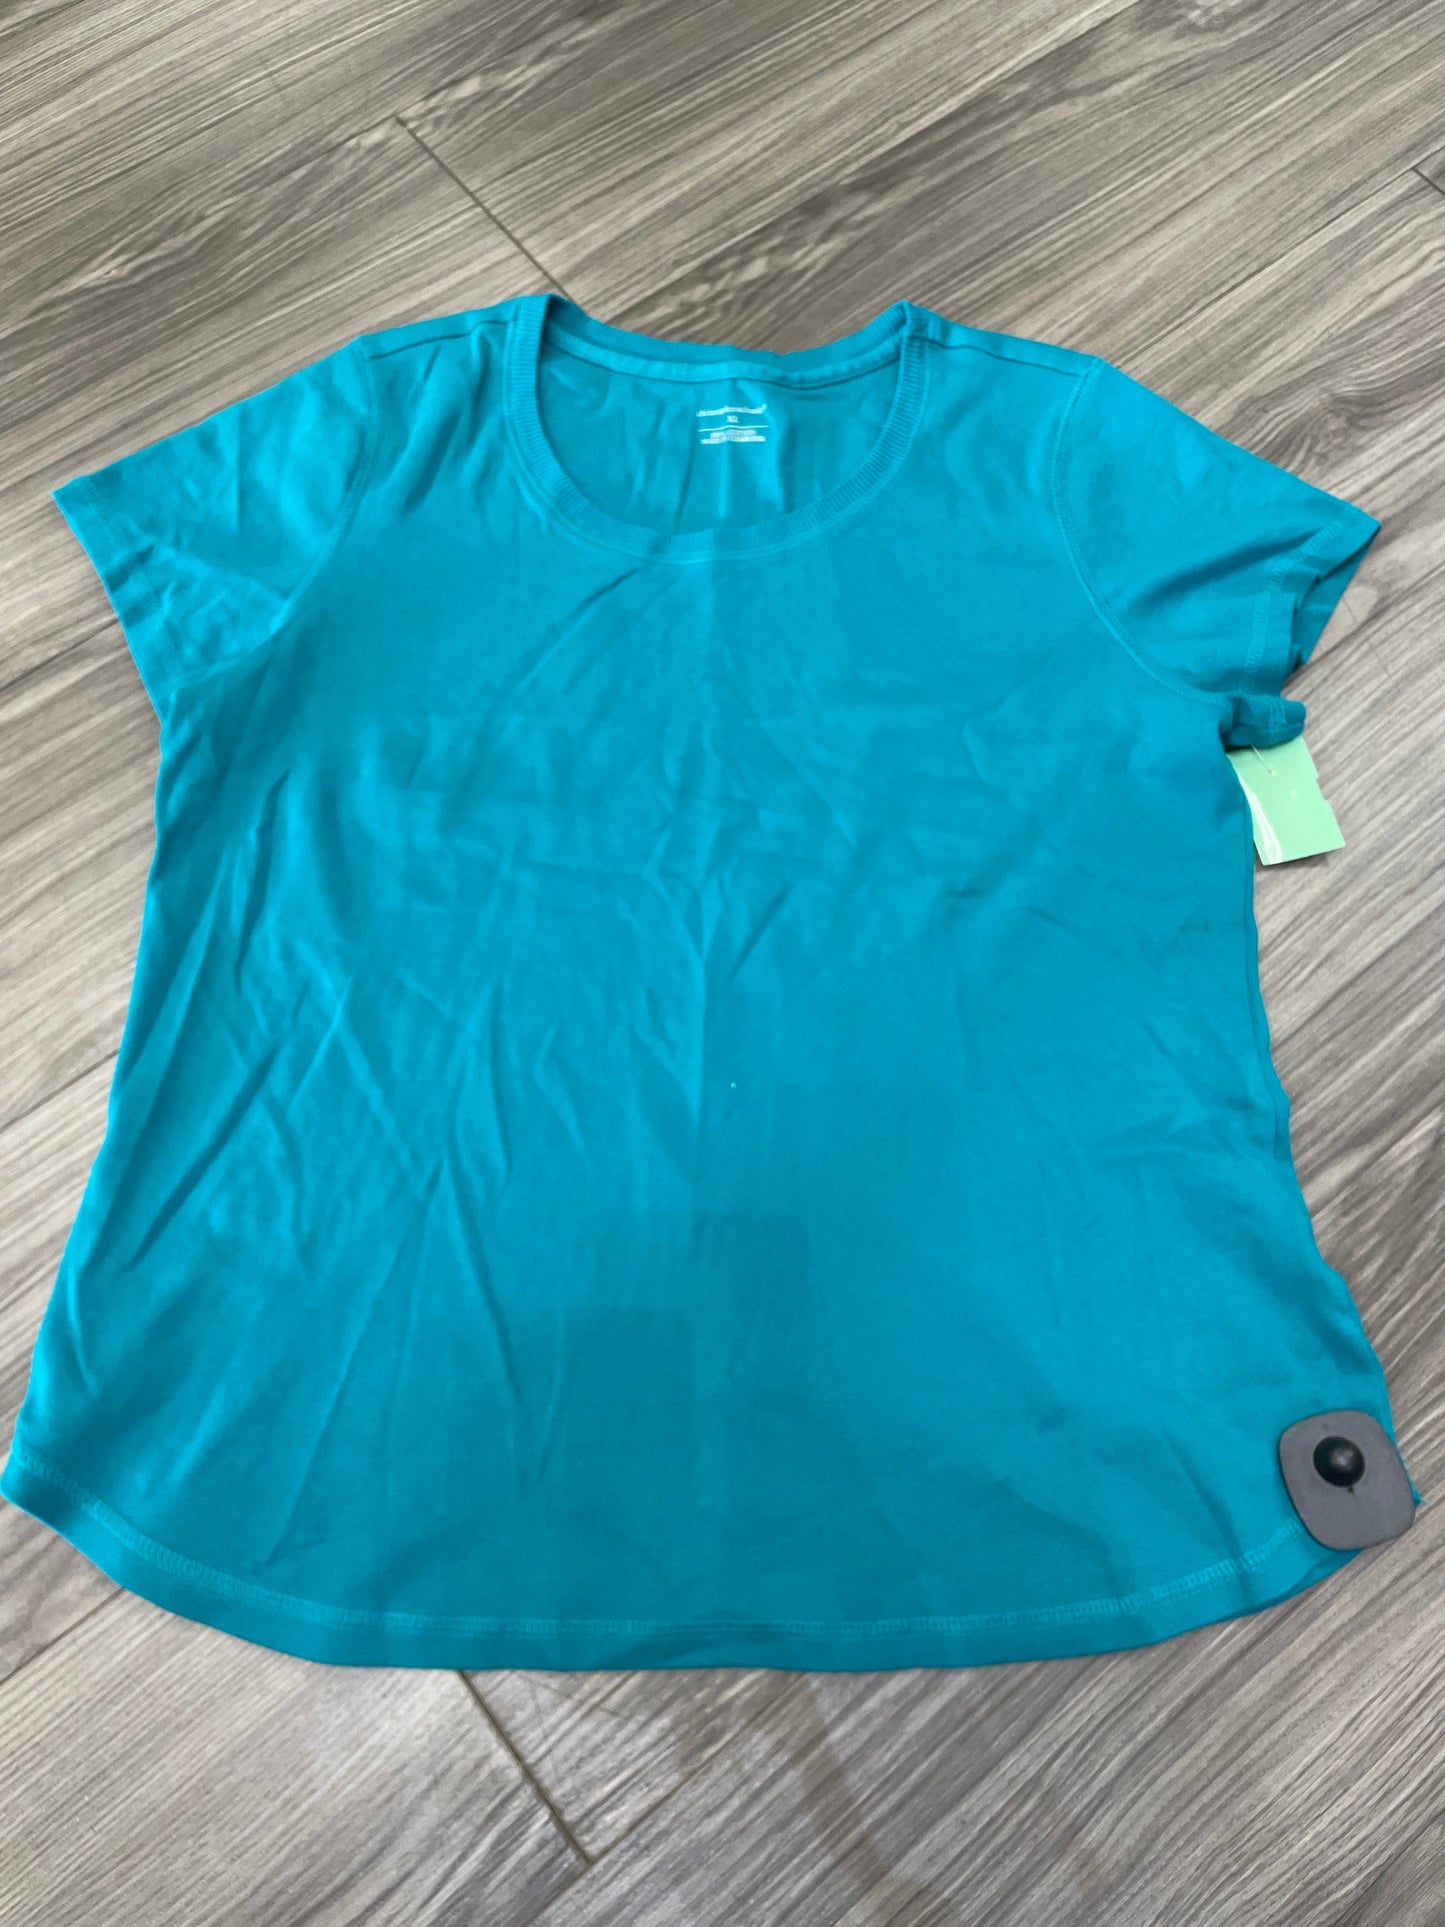 Teal Top Short Sleeve Christopher And Banks, Size Xl